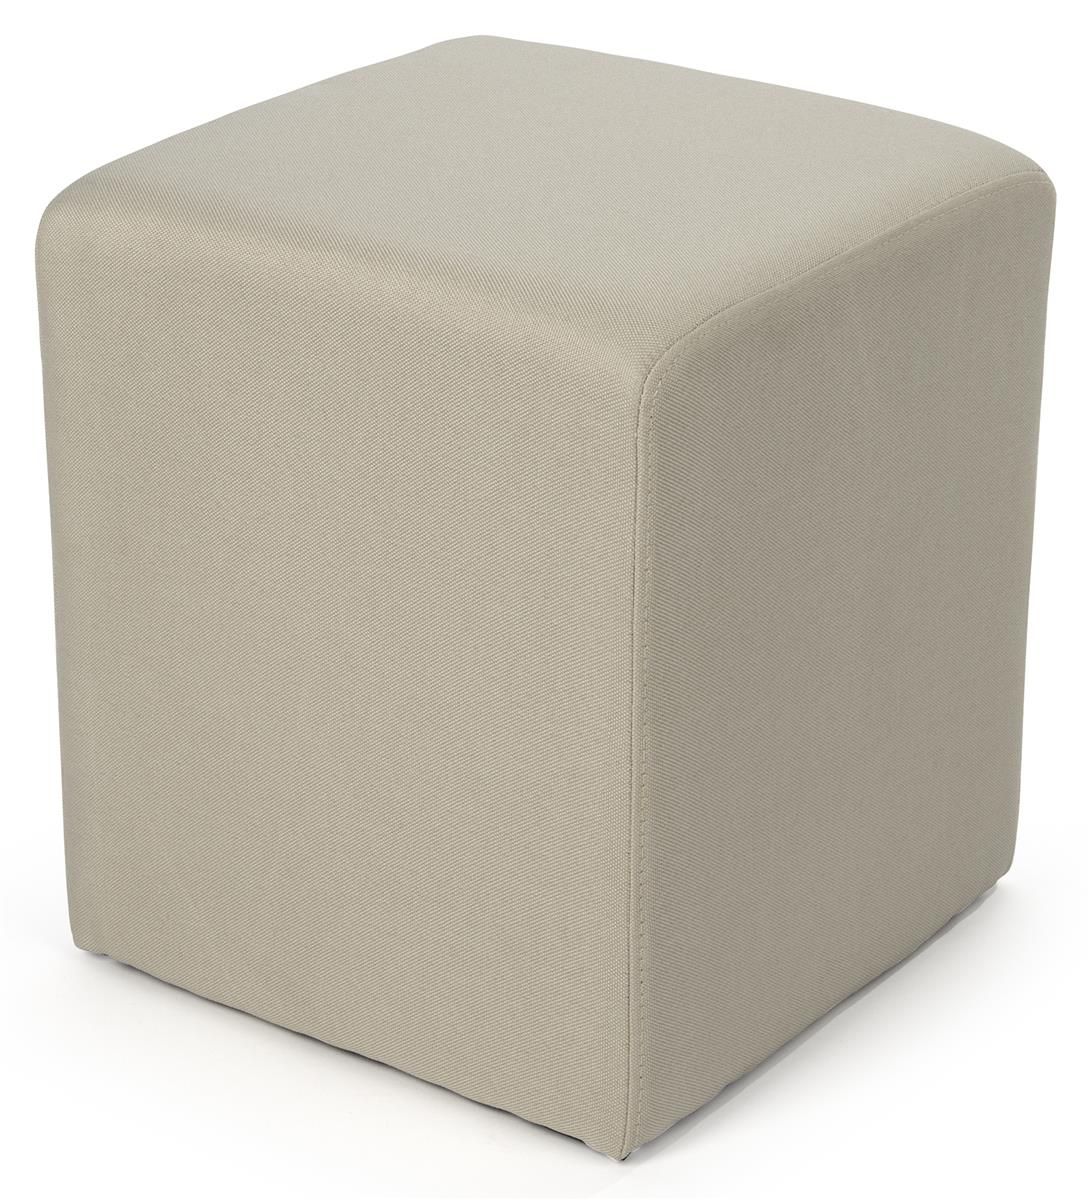 Soft Seating Cube | Woven Fabric Ottoman Inside Textured Gray Cuboid Pouf Ottomans (View 13 of 20)